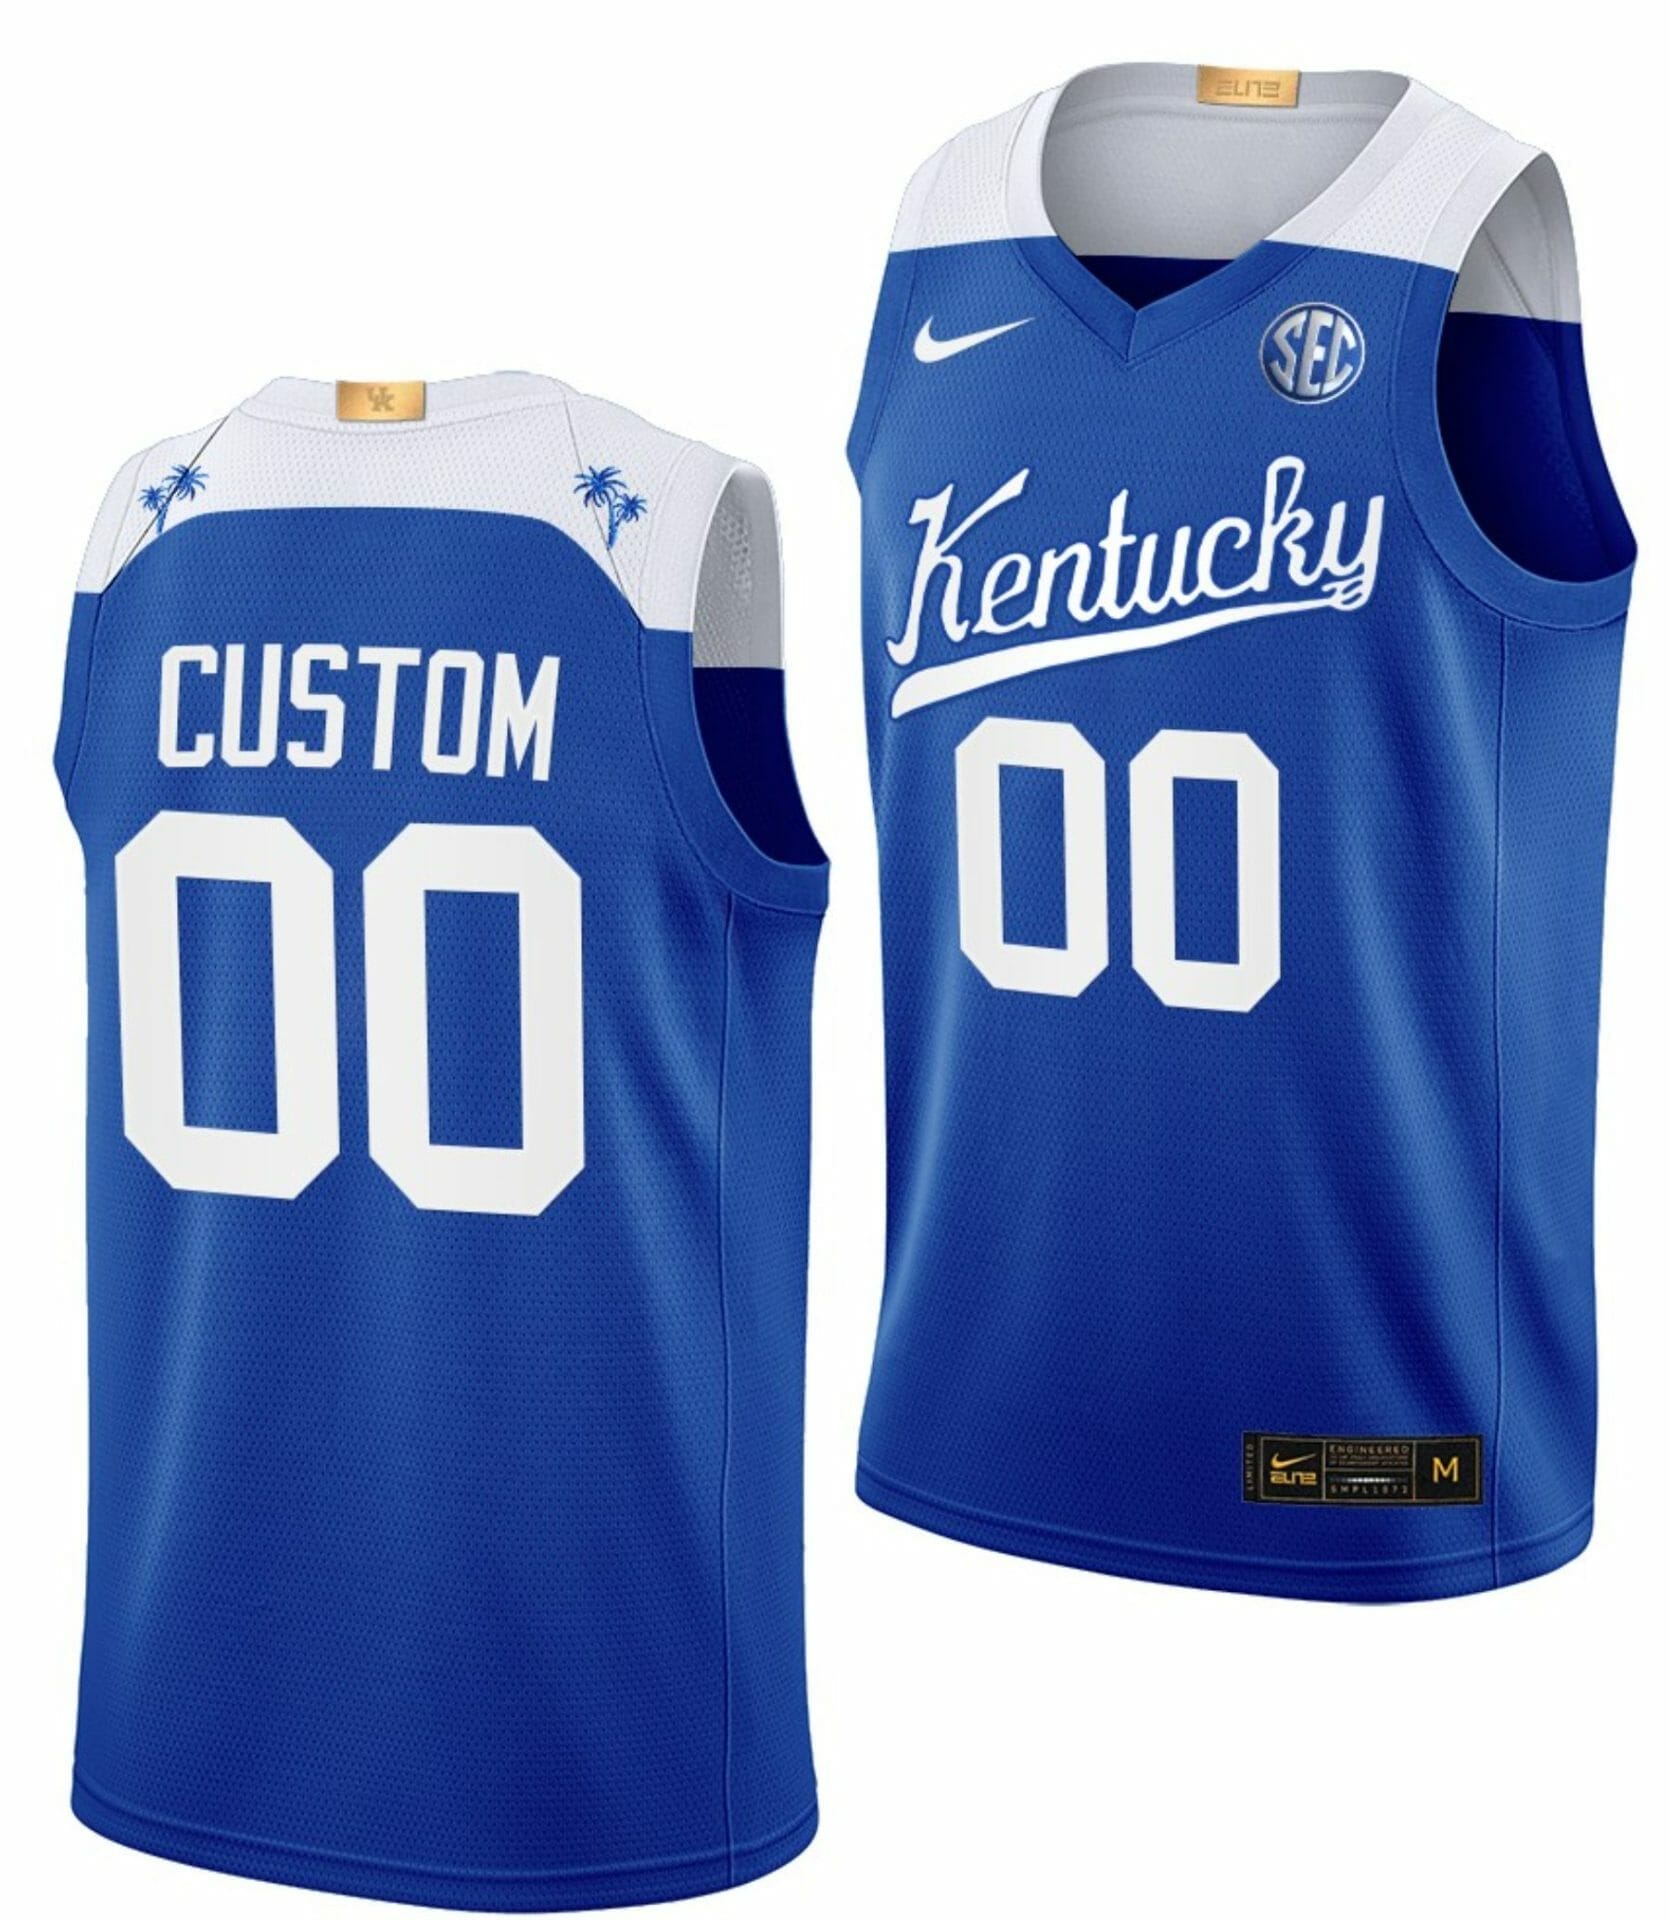 THE LAND 01 FREE CUSTOMIZE OF NAME AND NUMBER ONLY full sublimation high  quality fabrics basketball jersey/ trending jersey